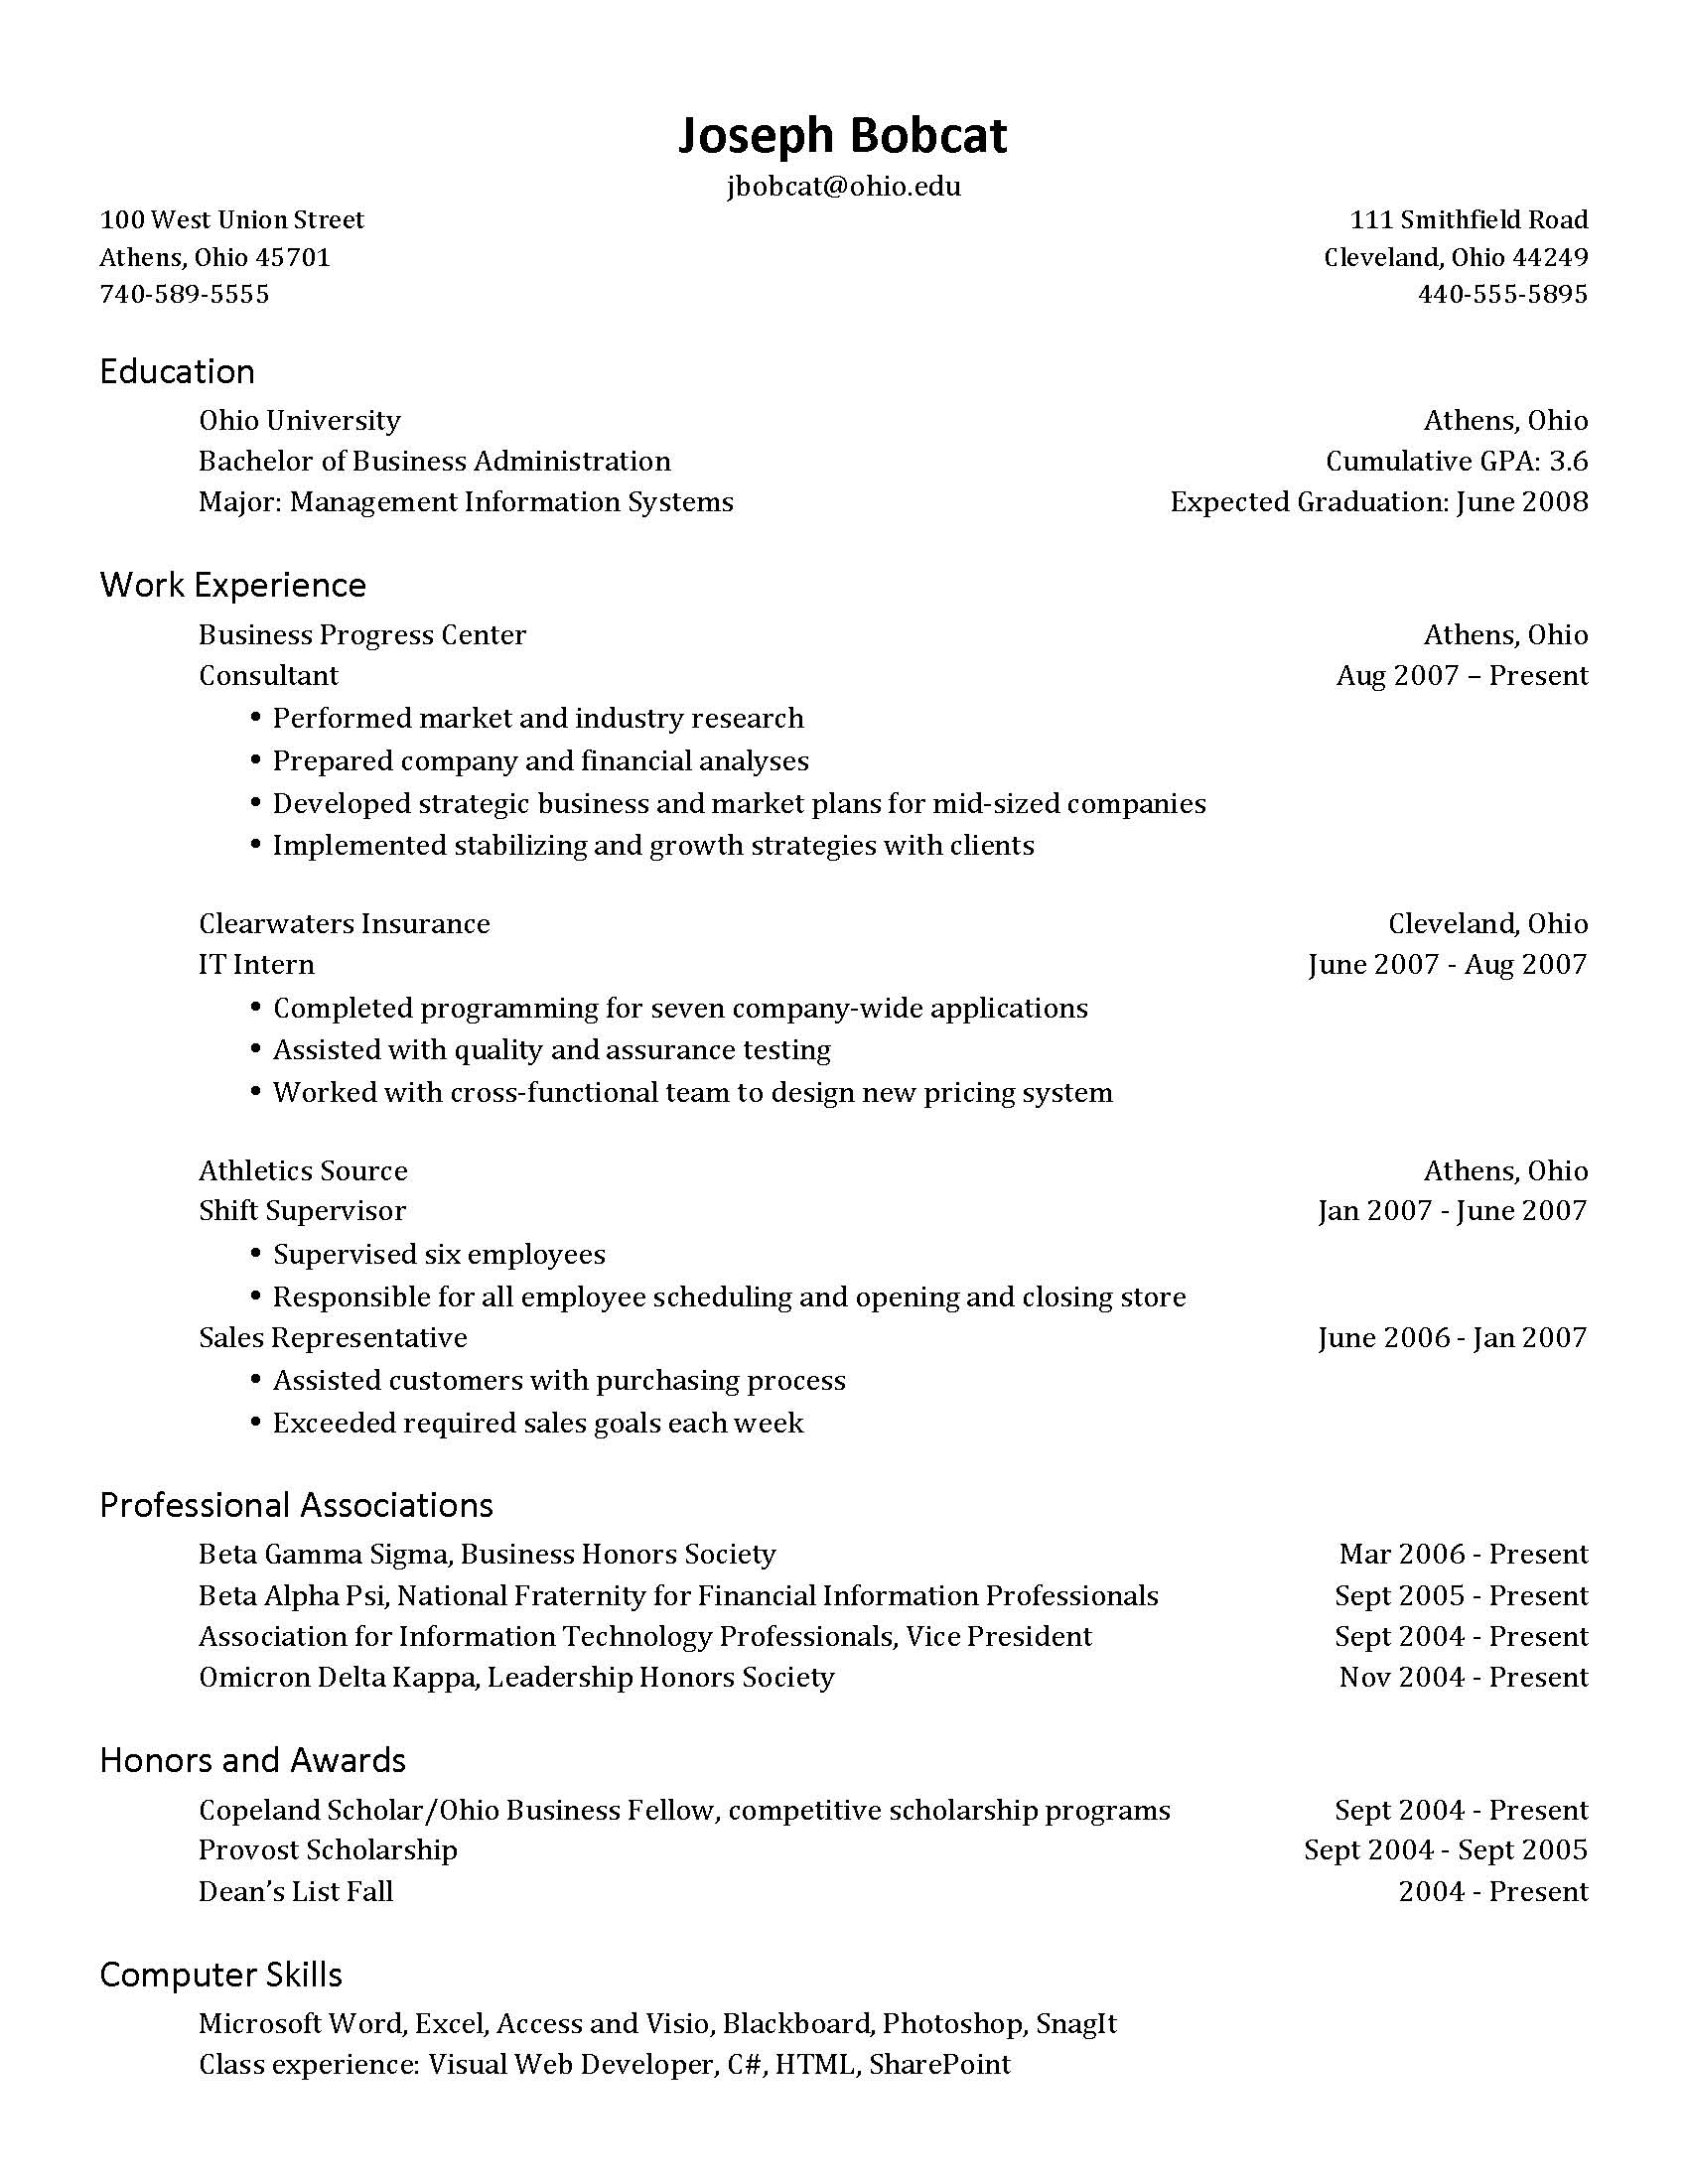 Should cover letter have same heading as resume